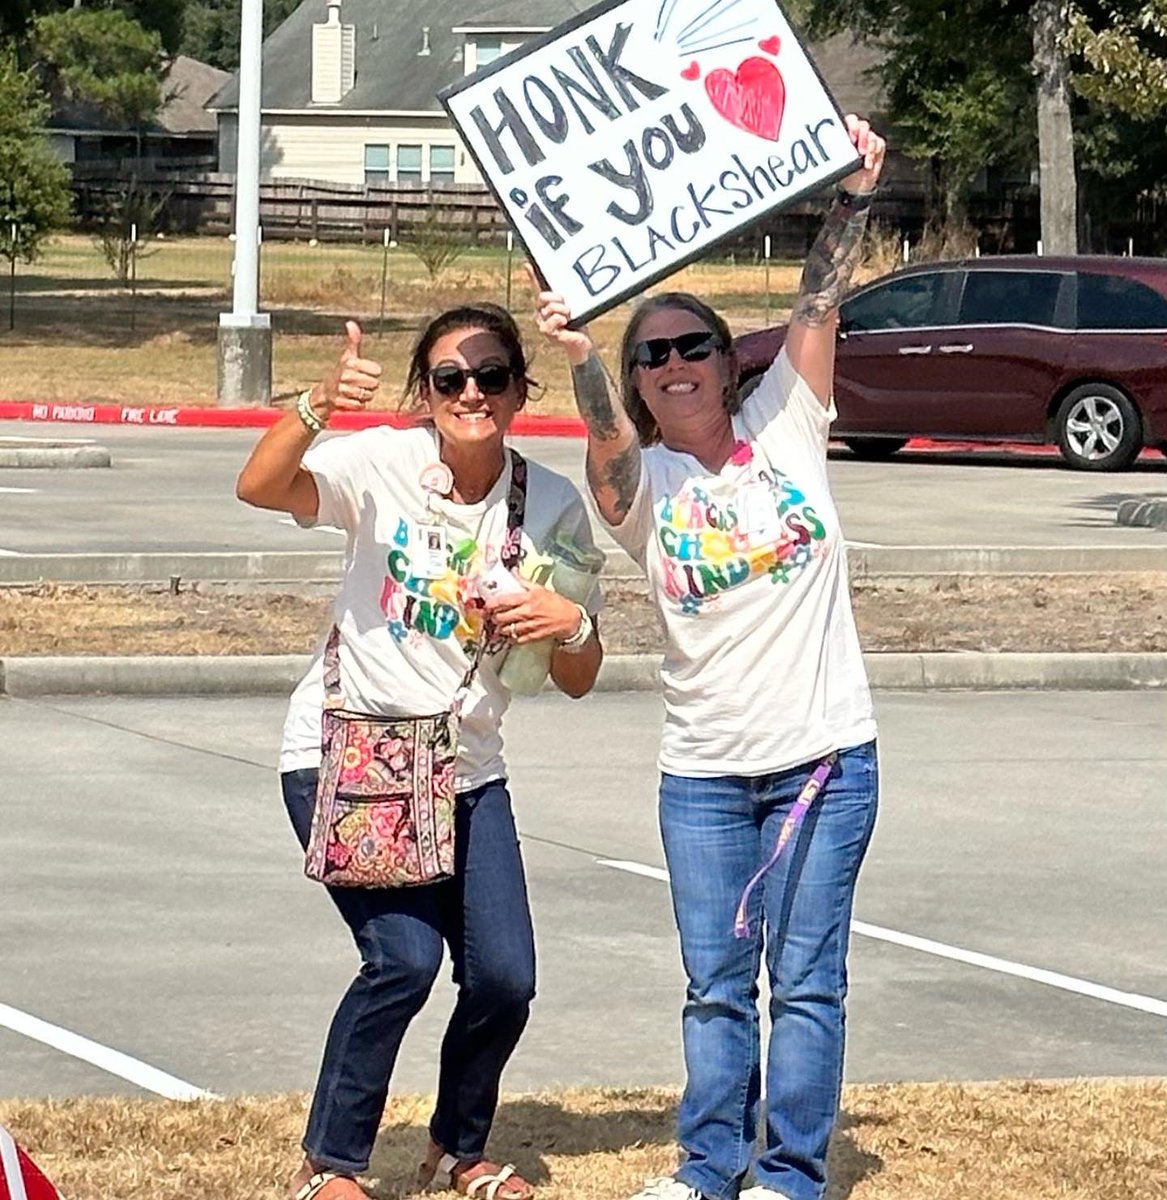 Friday car rider dismissal is always a jam! Love getting to close out our week with dancing, laughter, and even a little honking! #lovemyjob #BlackshearChoosesKindness